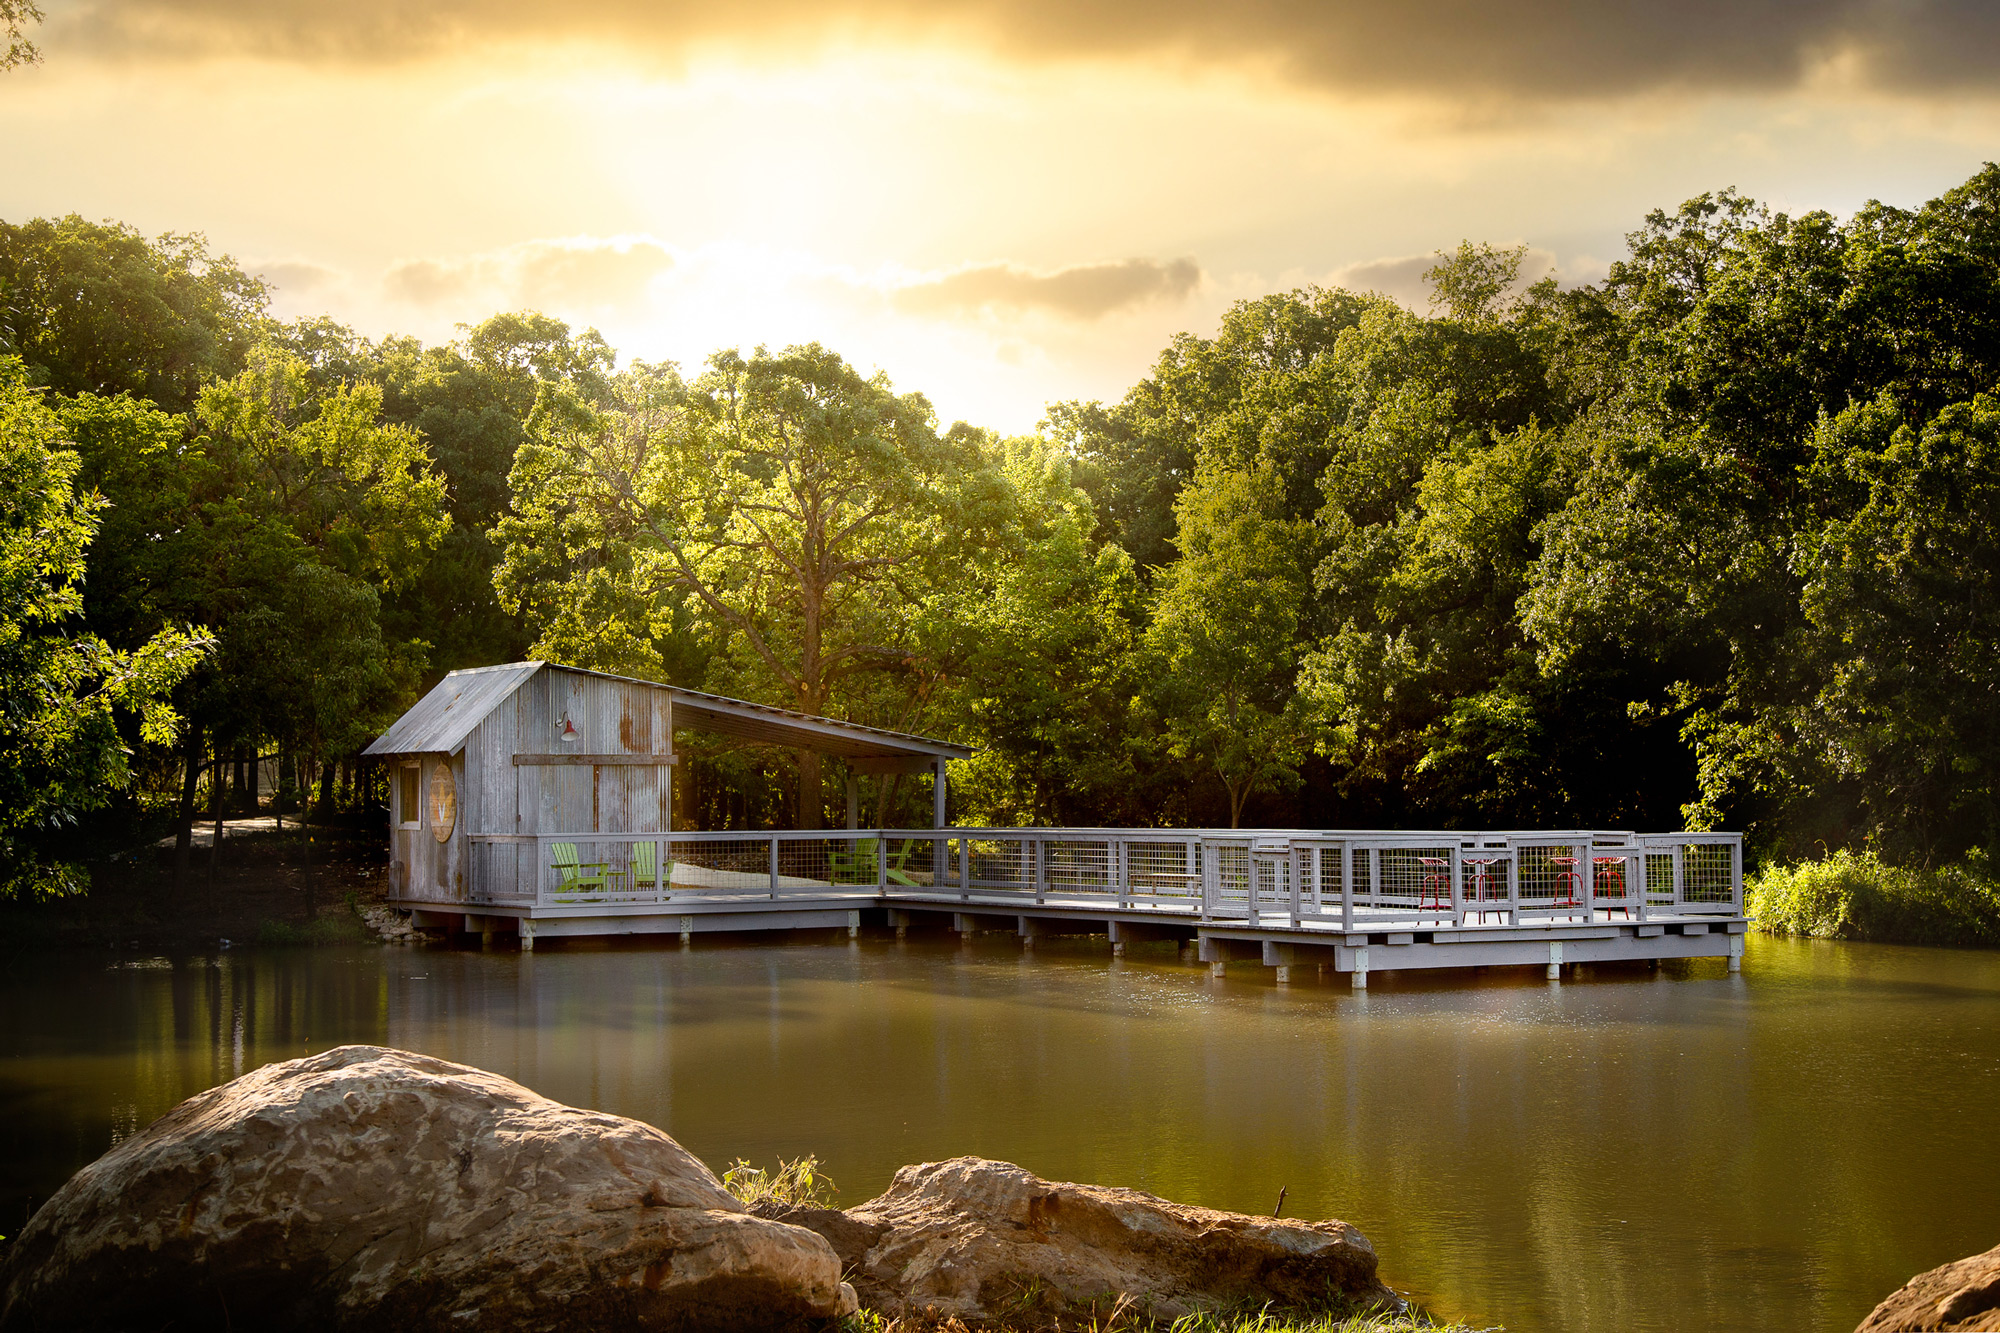 Fish Shack is a fully stocked catch & release fishing pond for residents of all ages to enjoy.